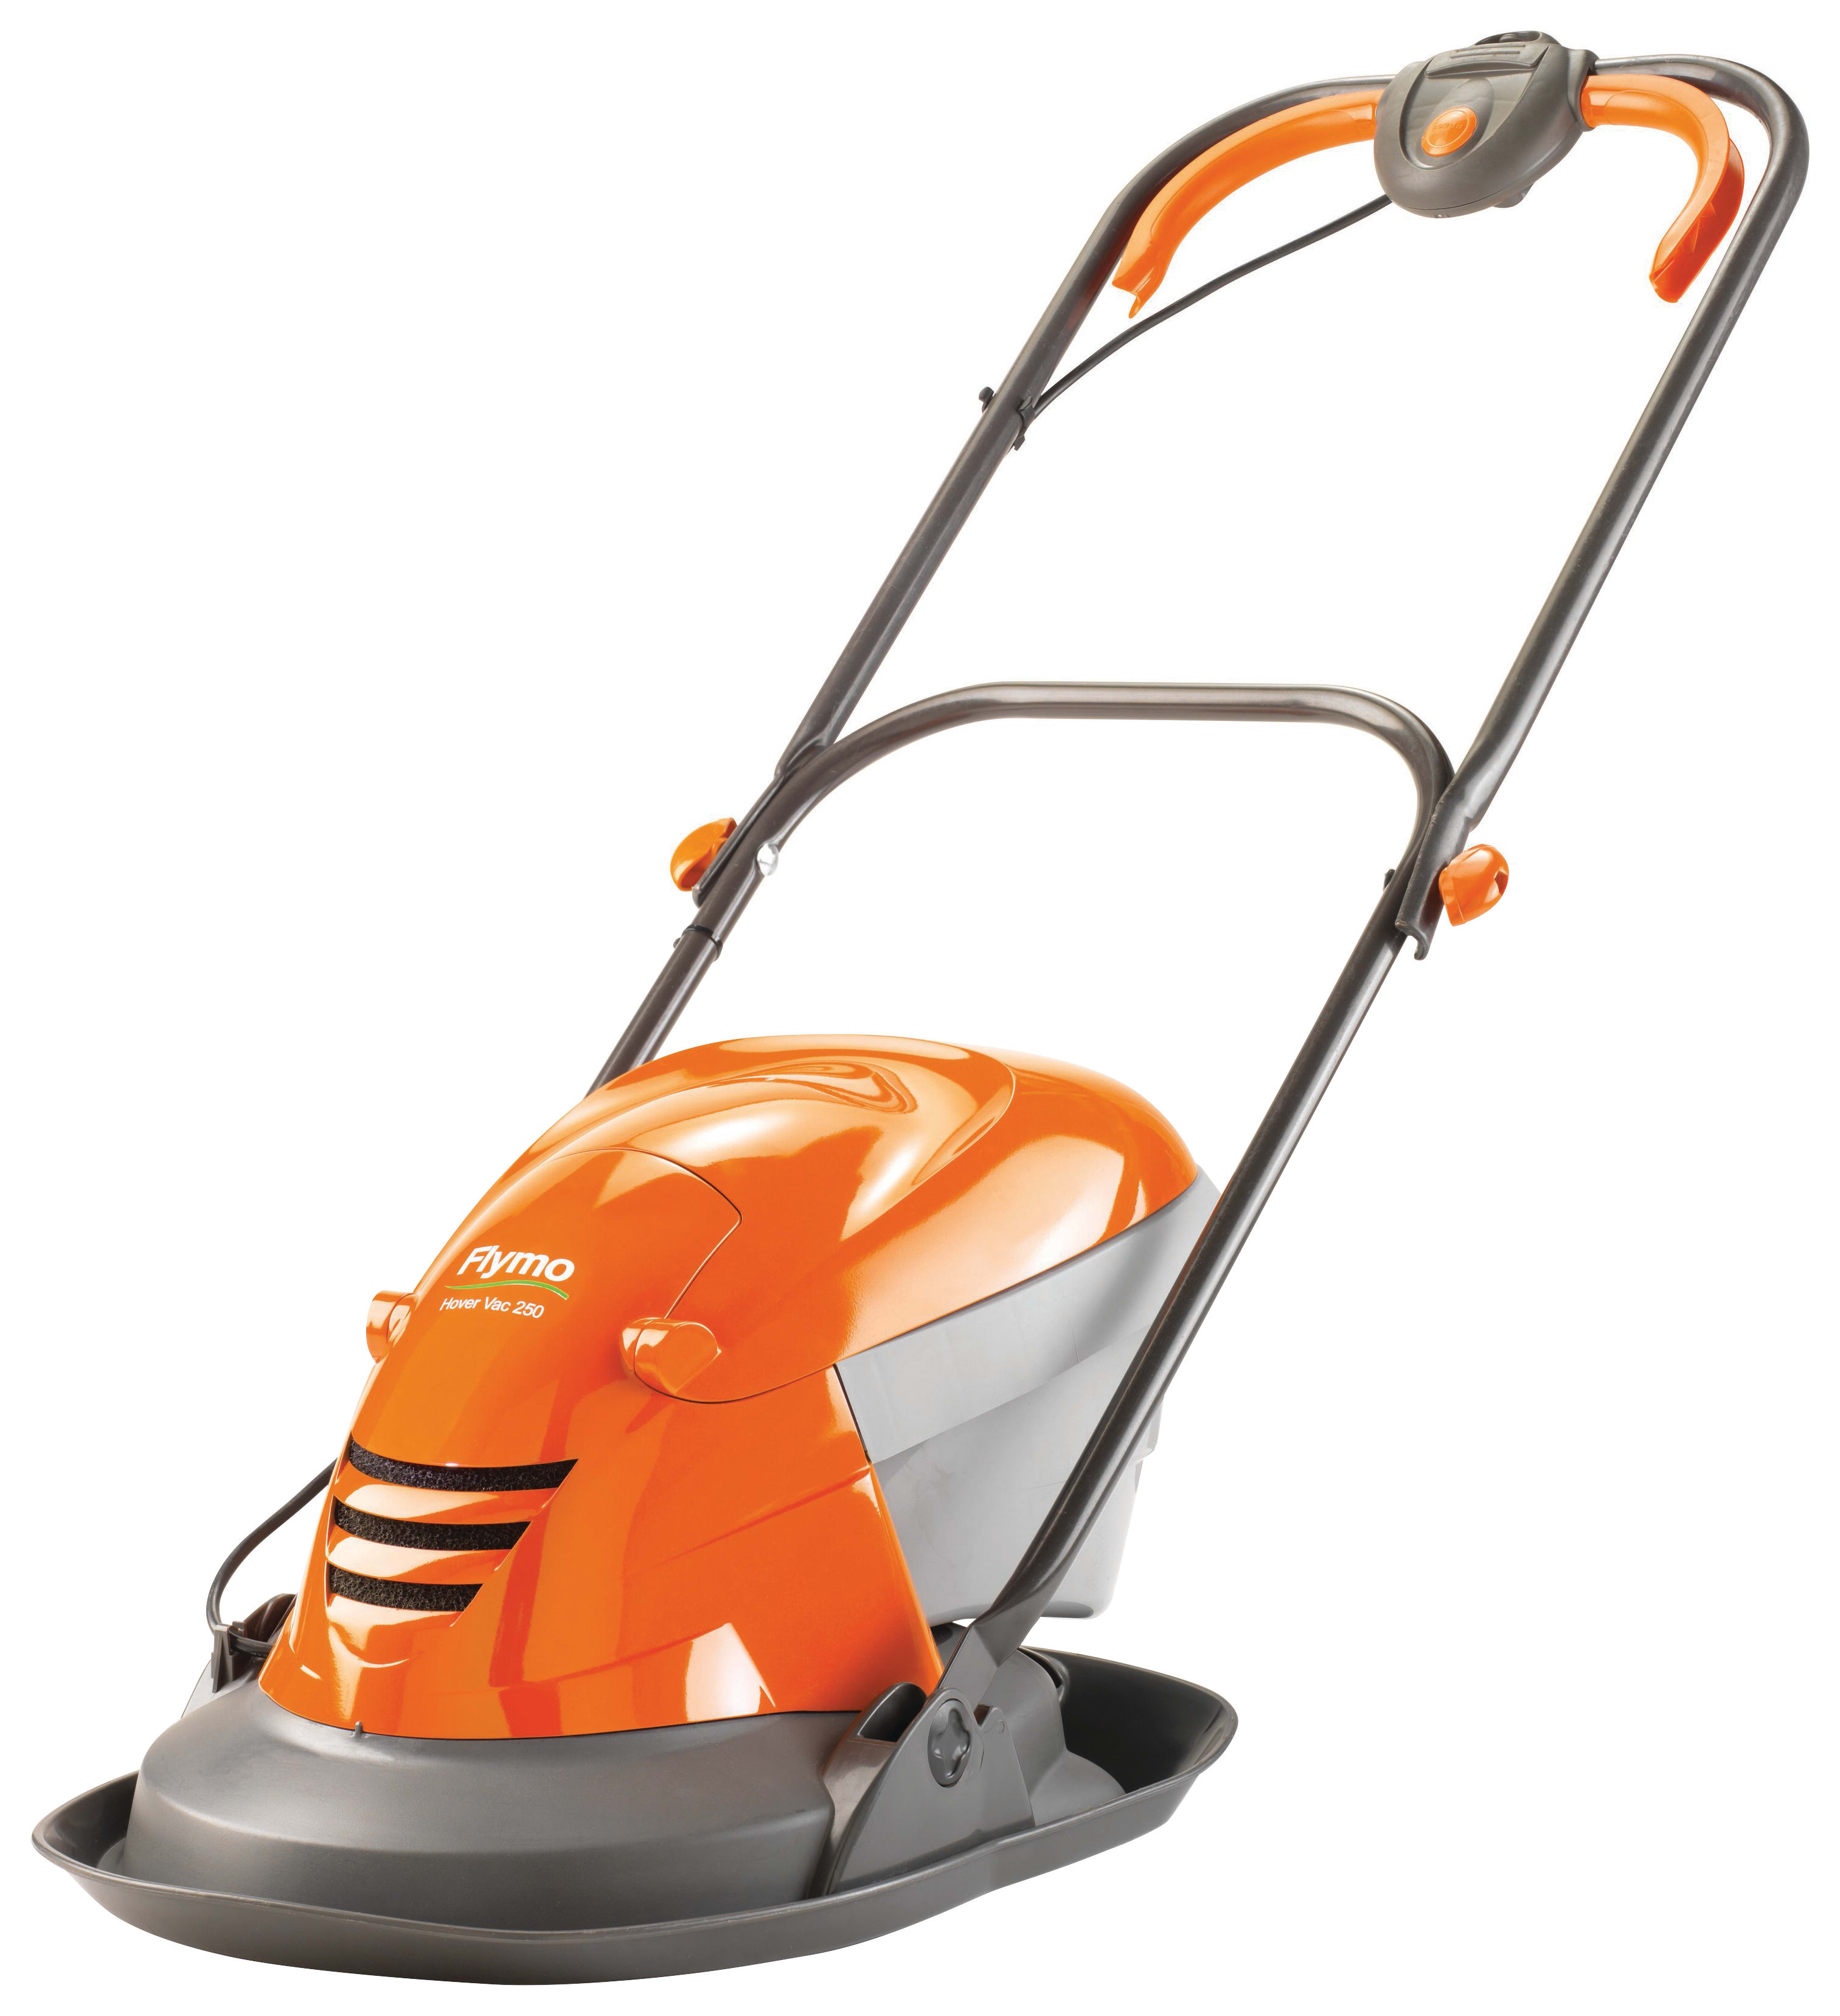 Flymo Hover Vac 250 Corded Hover Collect Lawnmower